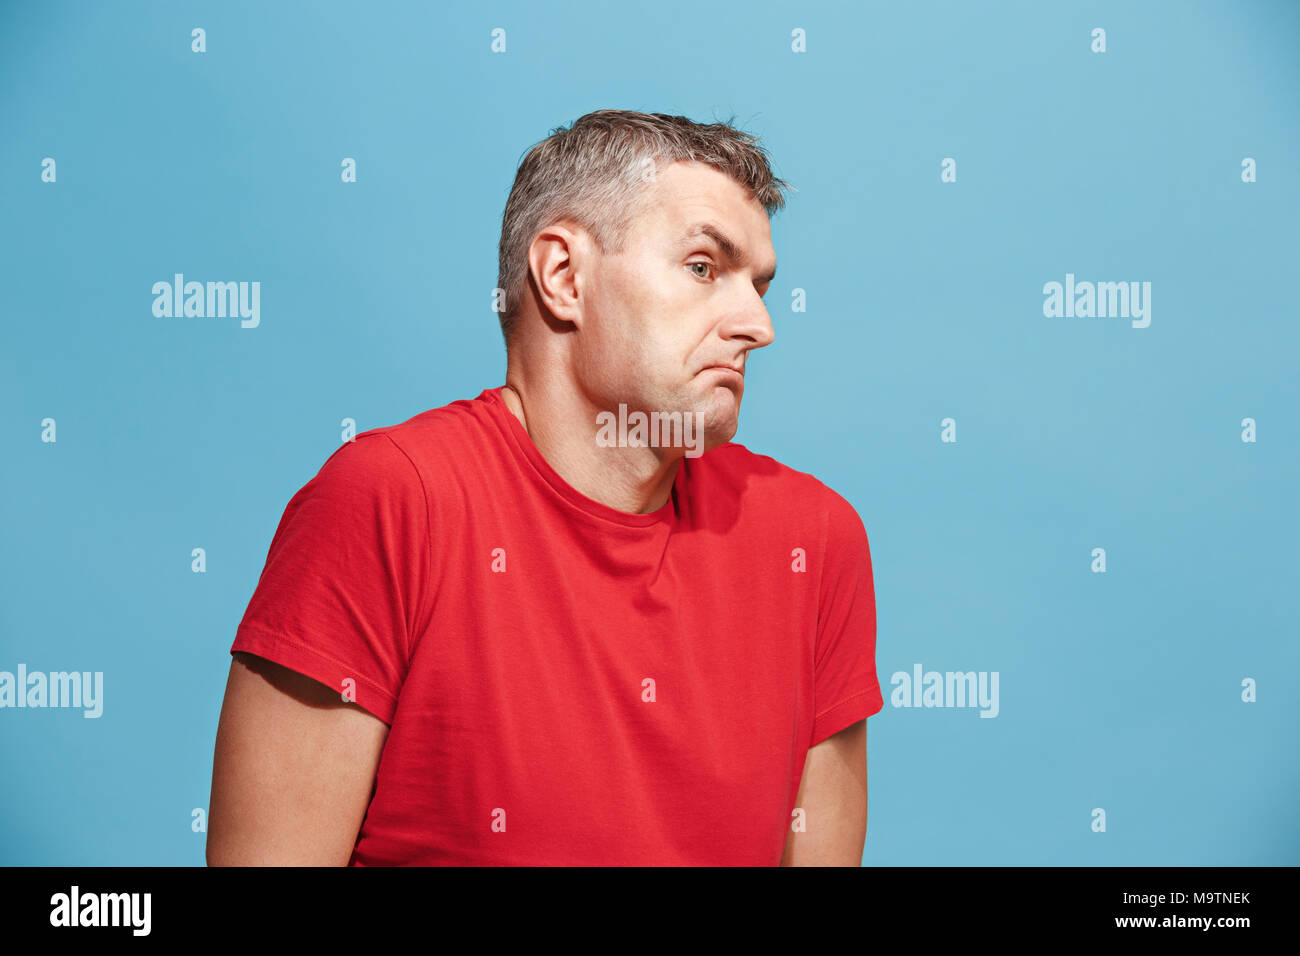 Suspiciont. Doubtful pensive man with thoughtful expression making choice against blue background Stock Photo